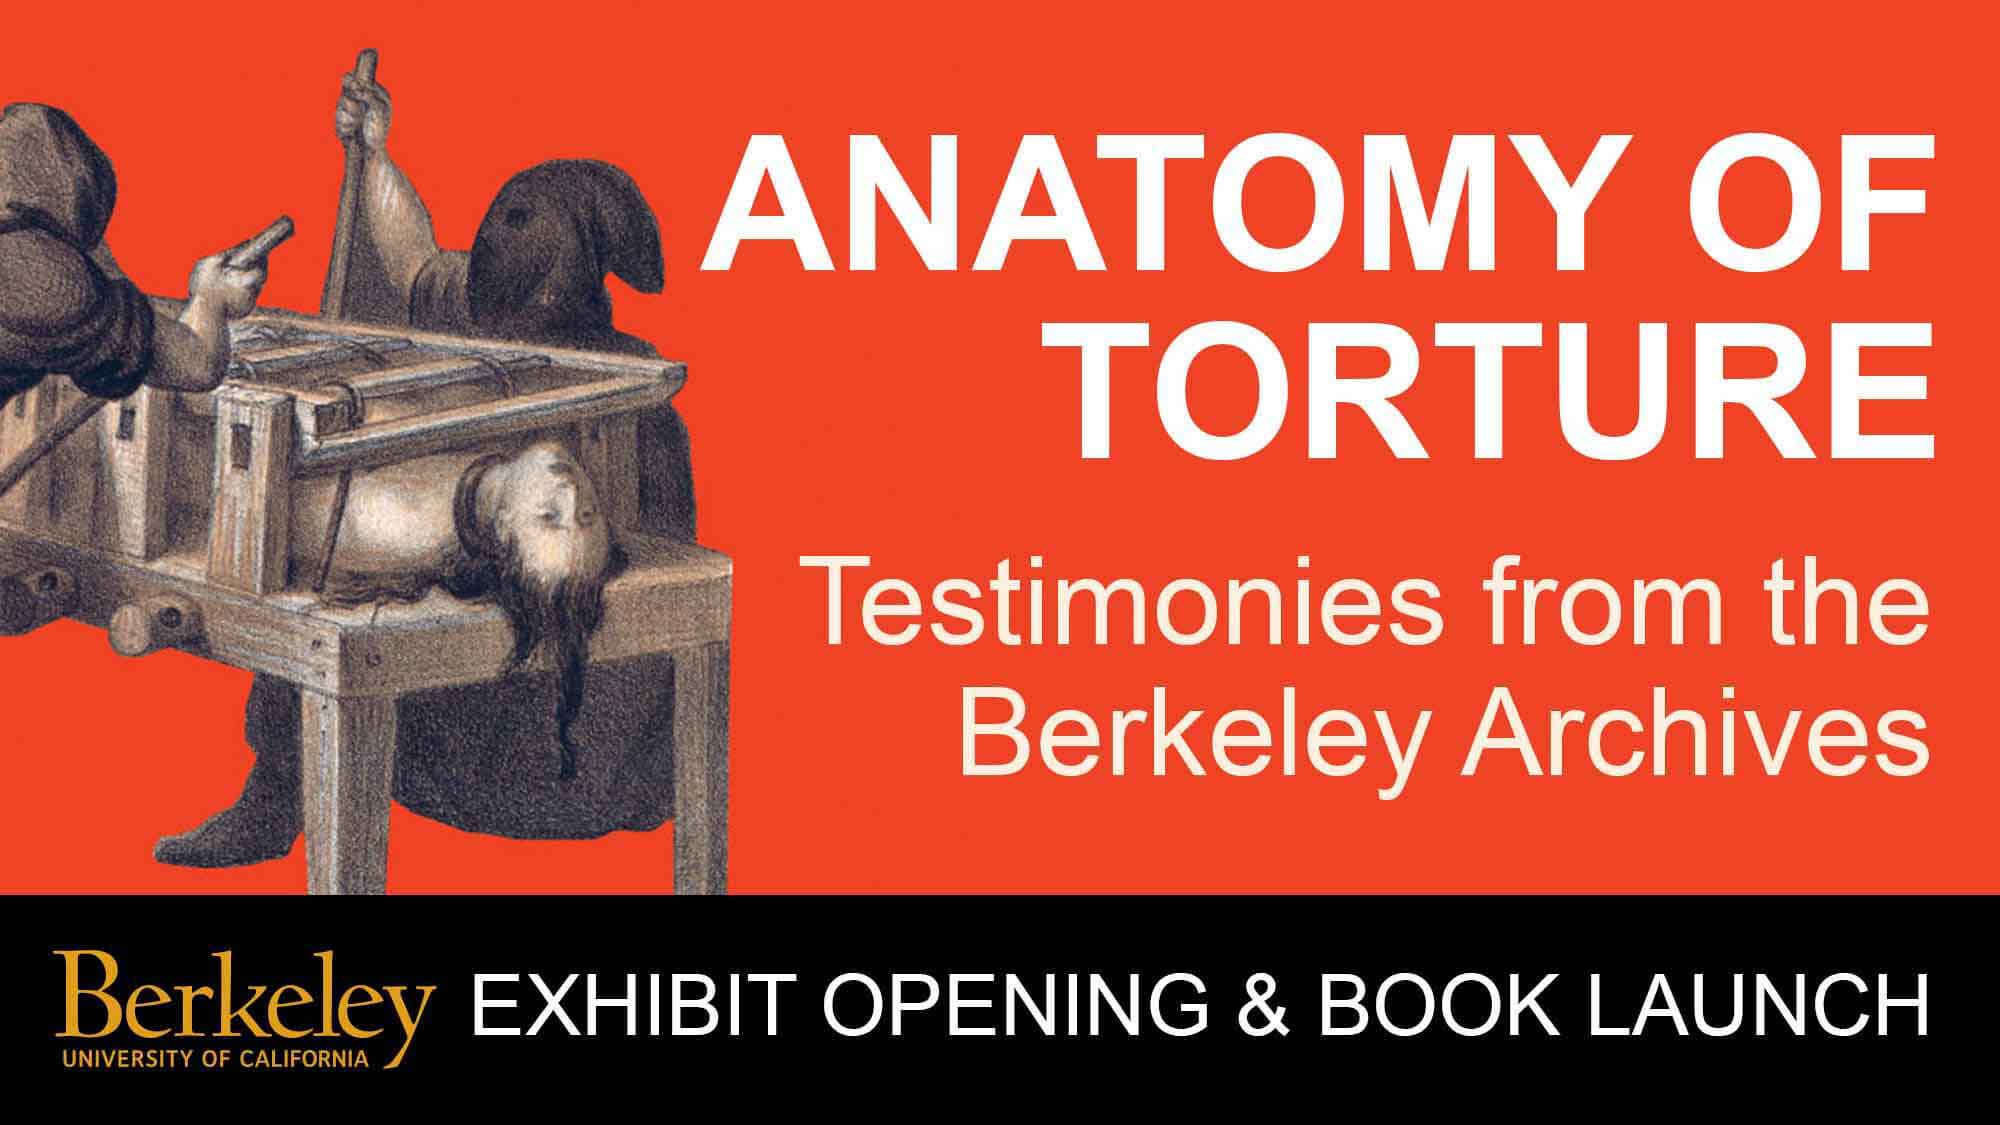 Anatomy of Torture Opening and Book Launch